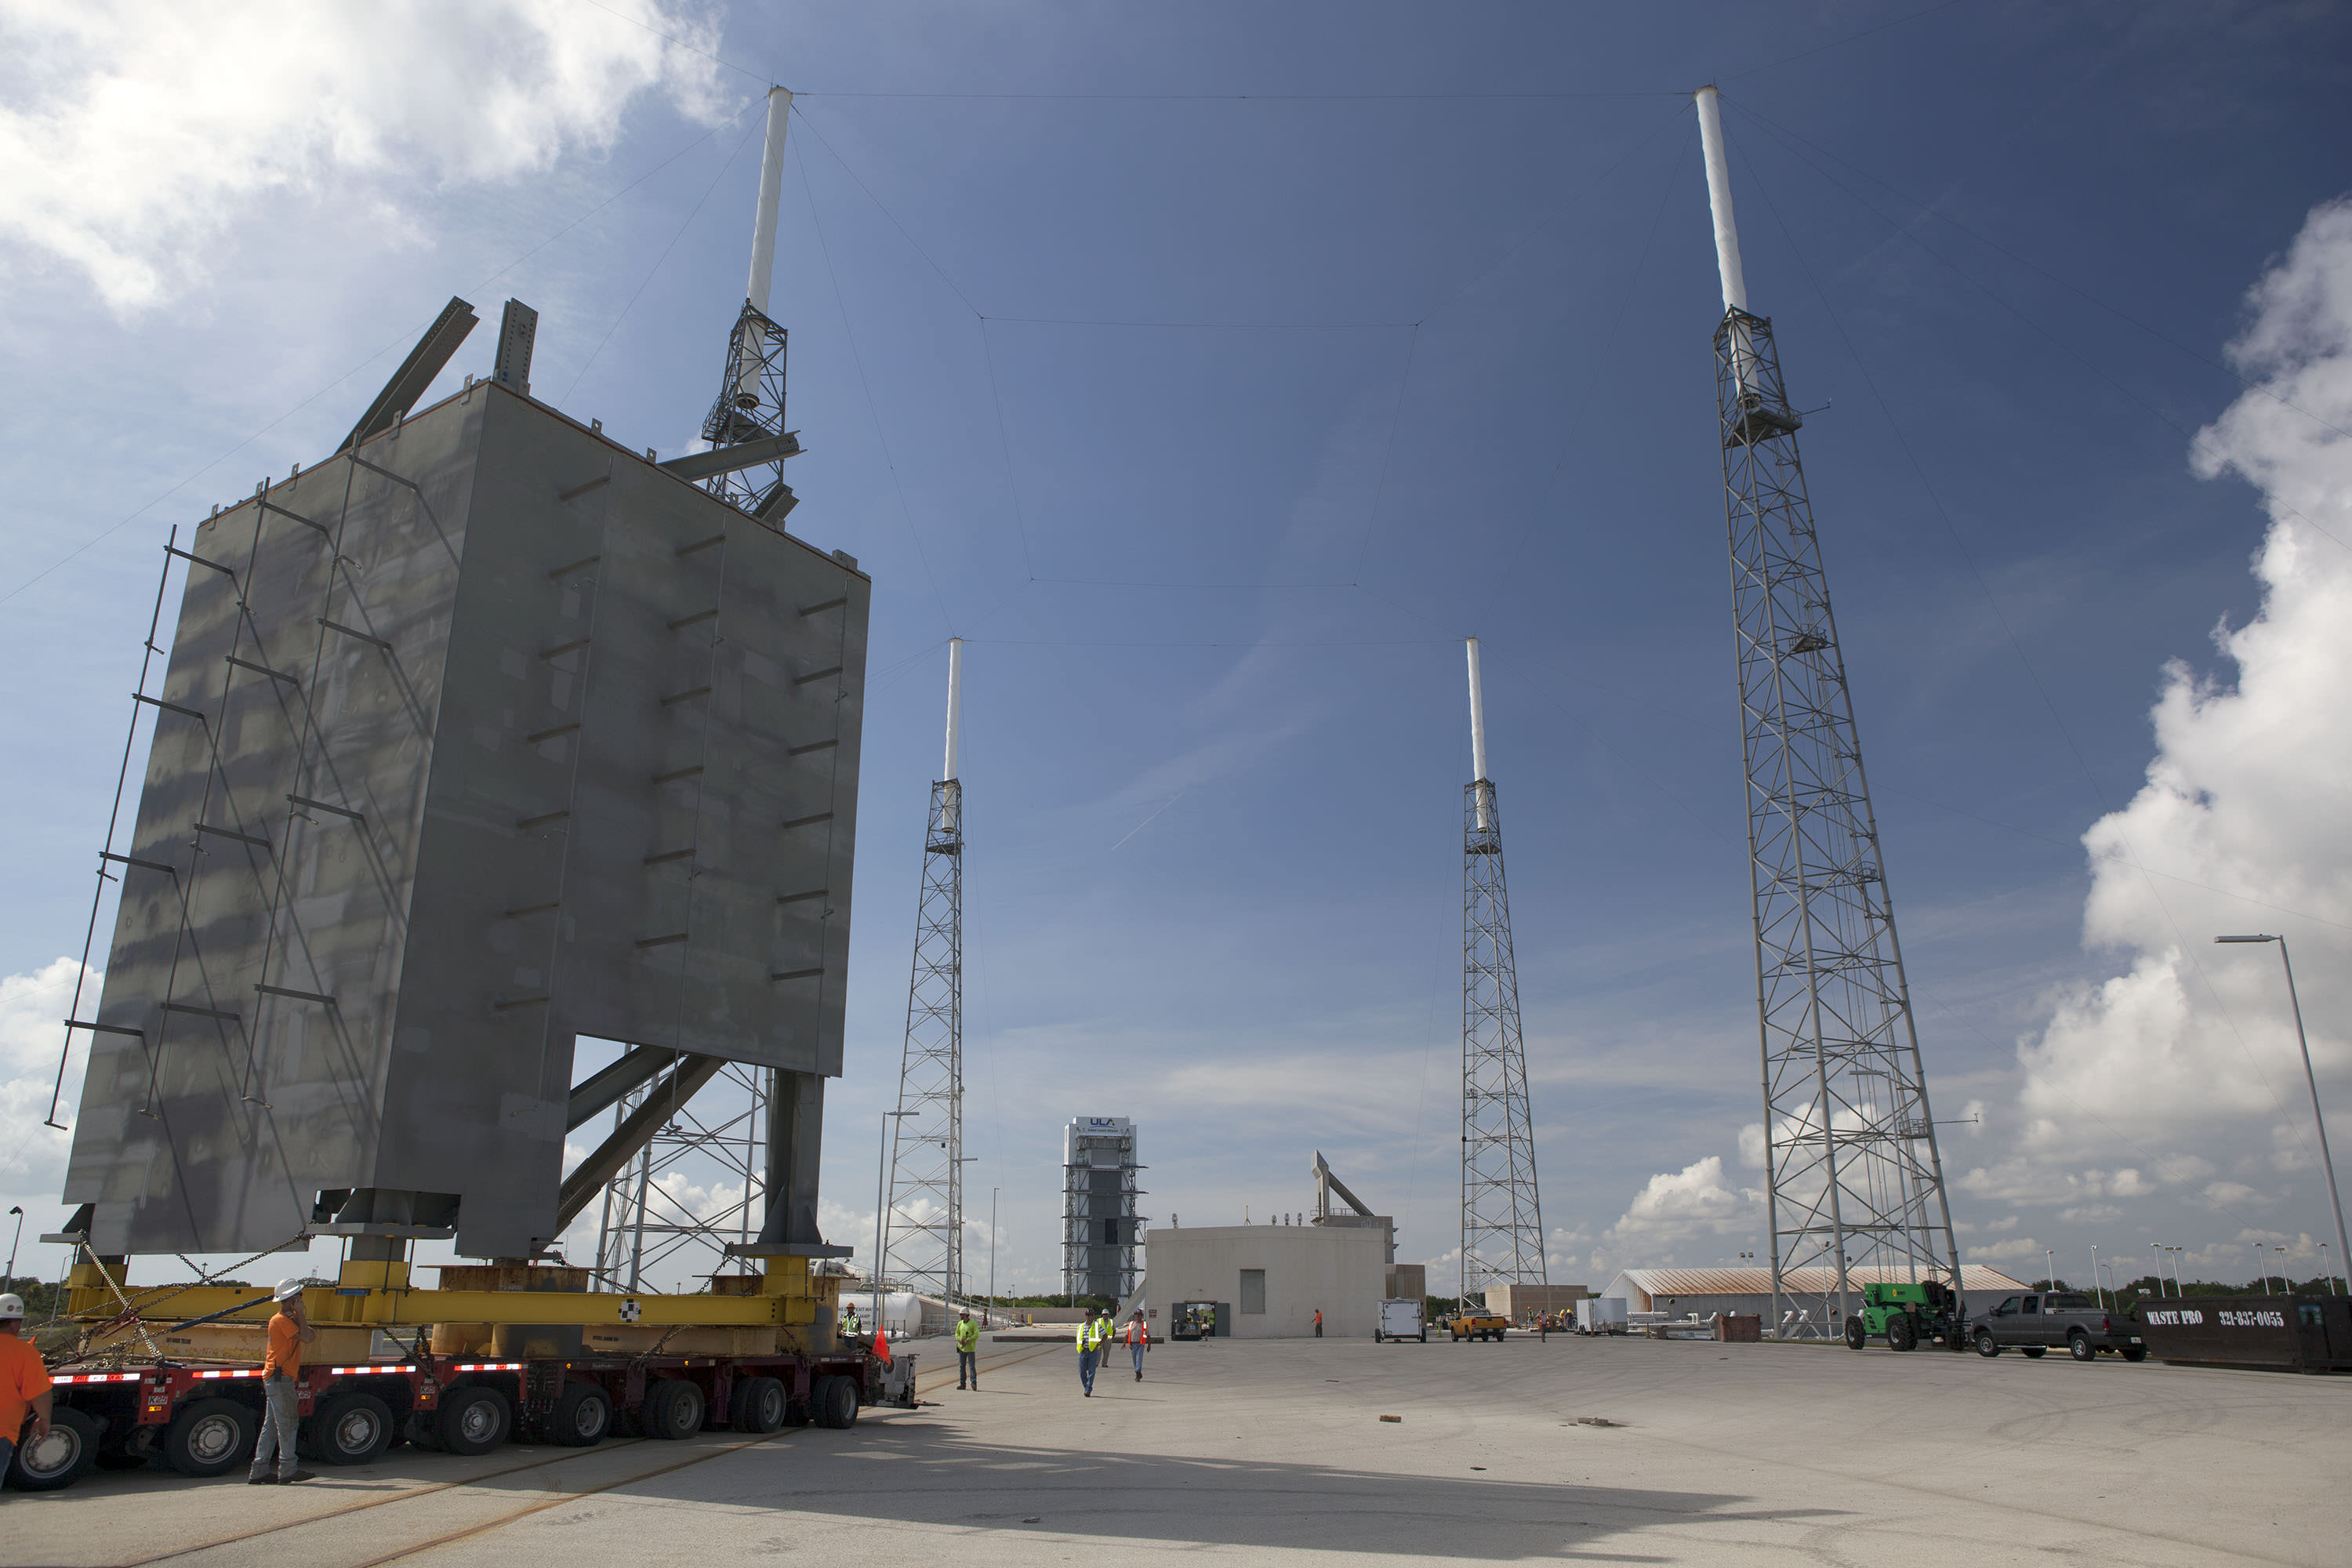 The first tier of the new Crew Access Tower for the Boeing CST-100 Starliner arrives at Space Launch Complex-41 at Cape Canaveral Air Force Station in Florida.   The tower will provide access at the pad for astronauts and ground support teams  to the Boeing CST-100 Starliner launching atop a United Launch Alliance Atlas V rocket.   Photo credit: NASA/Dmitrios Gerondidakis